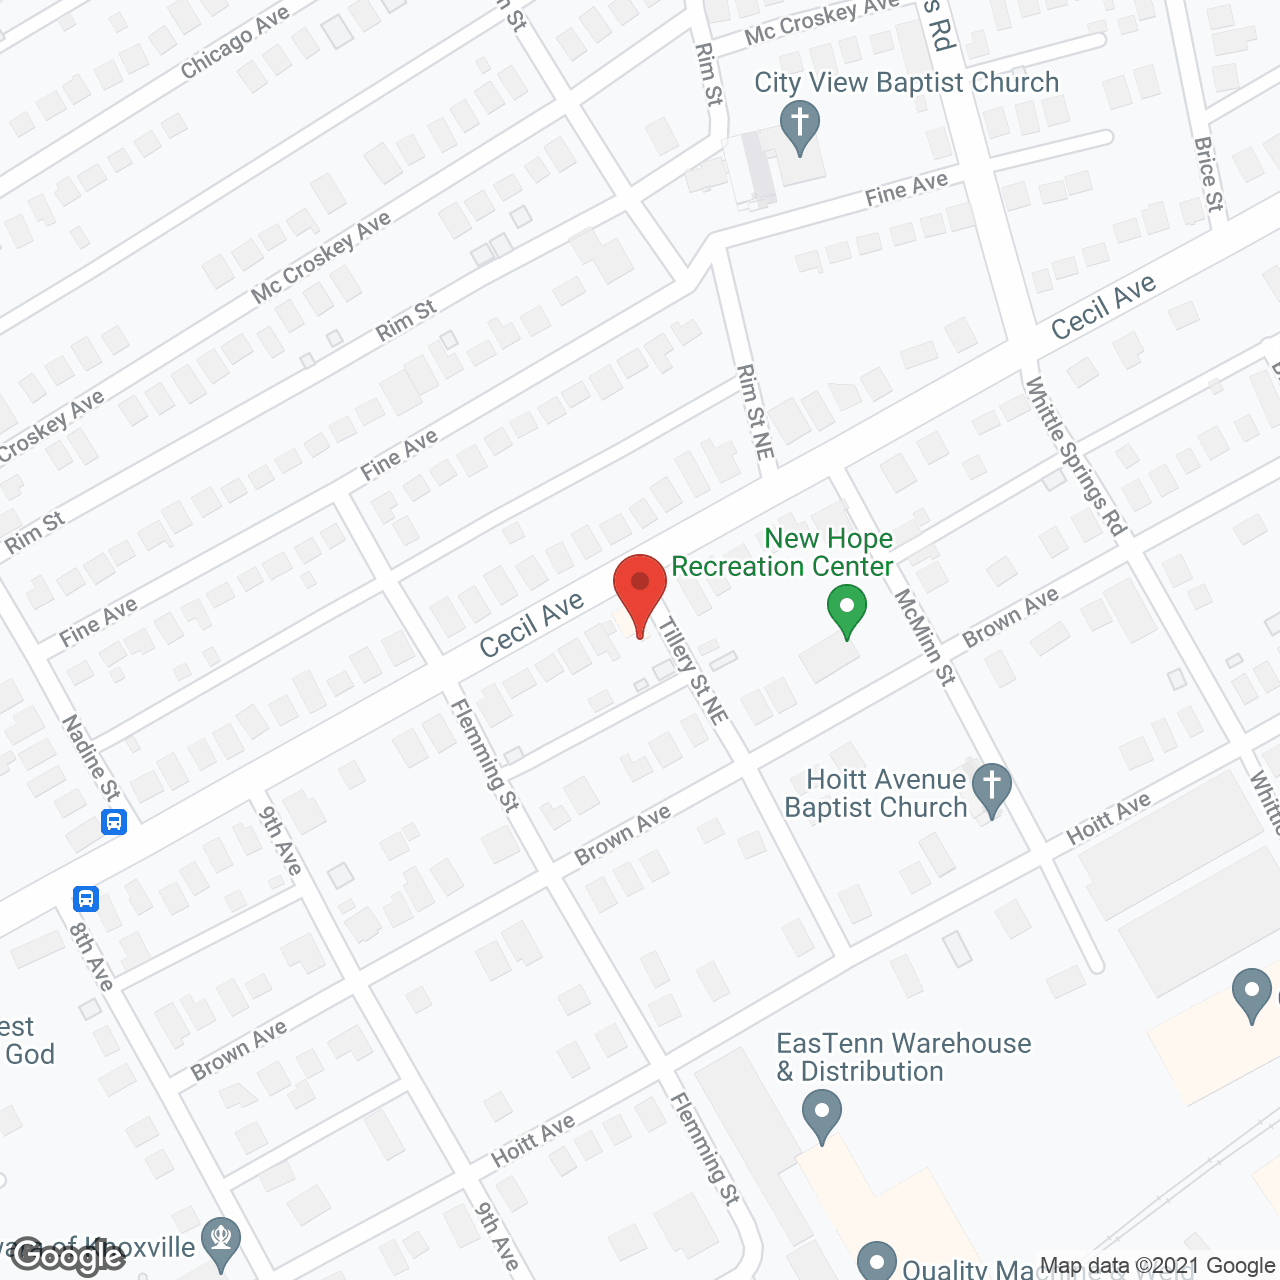 Cecil Boarding House in google map